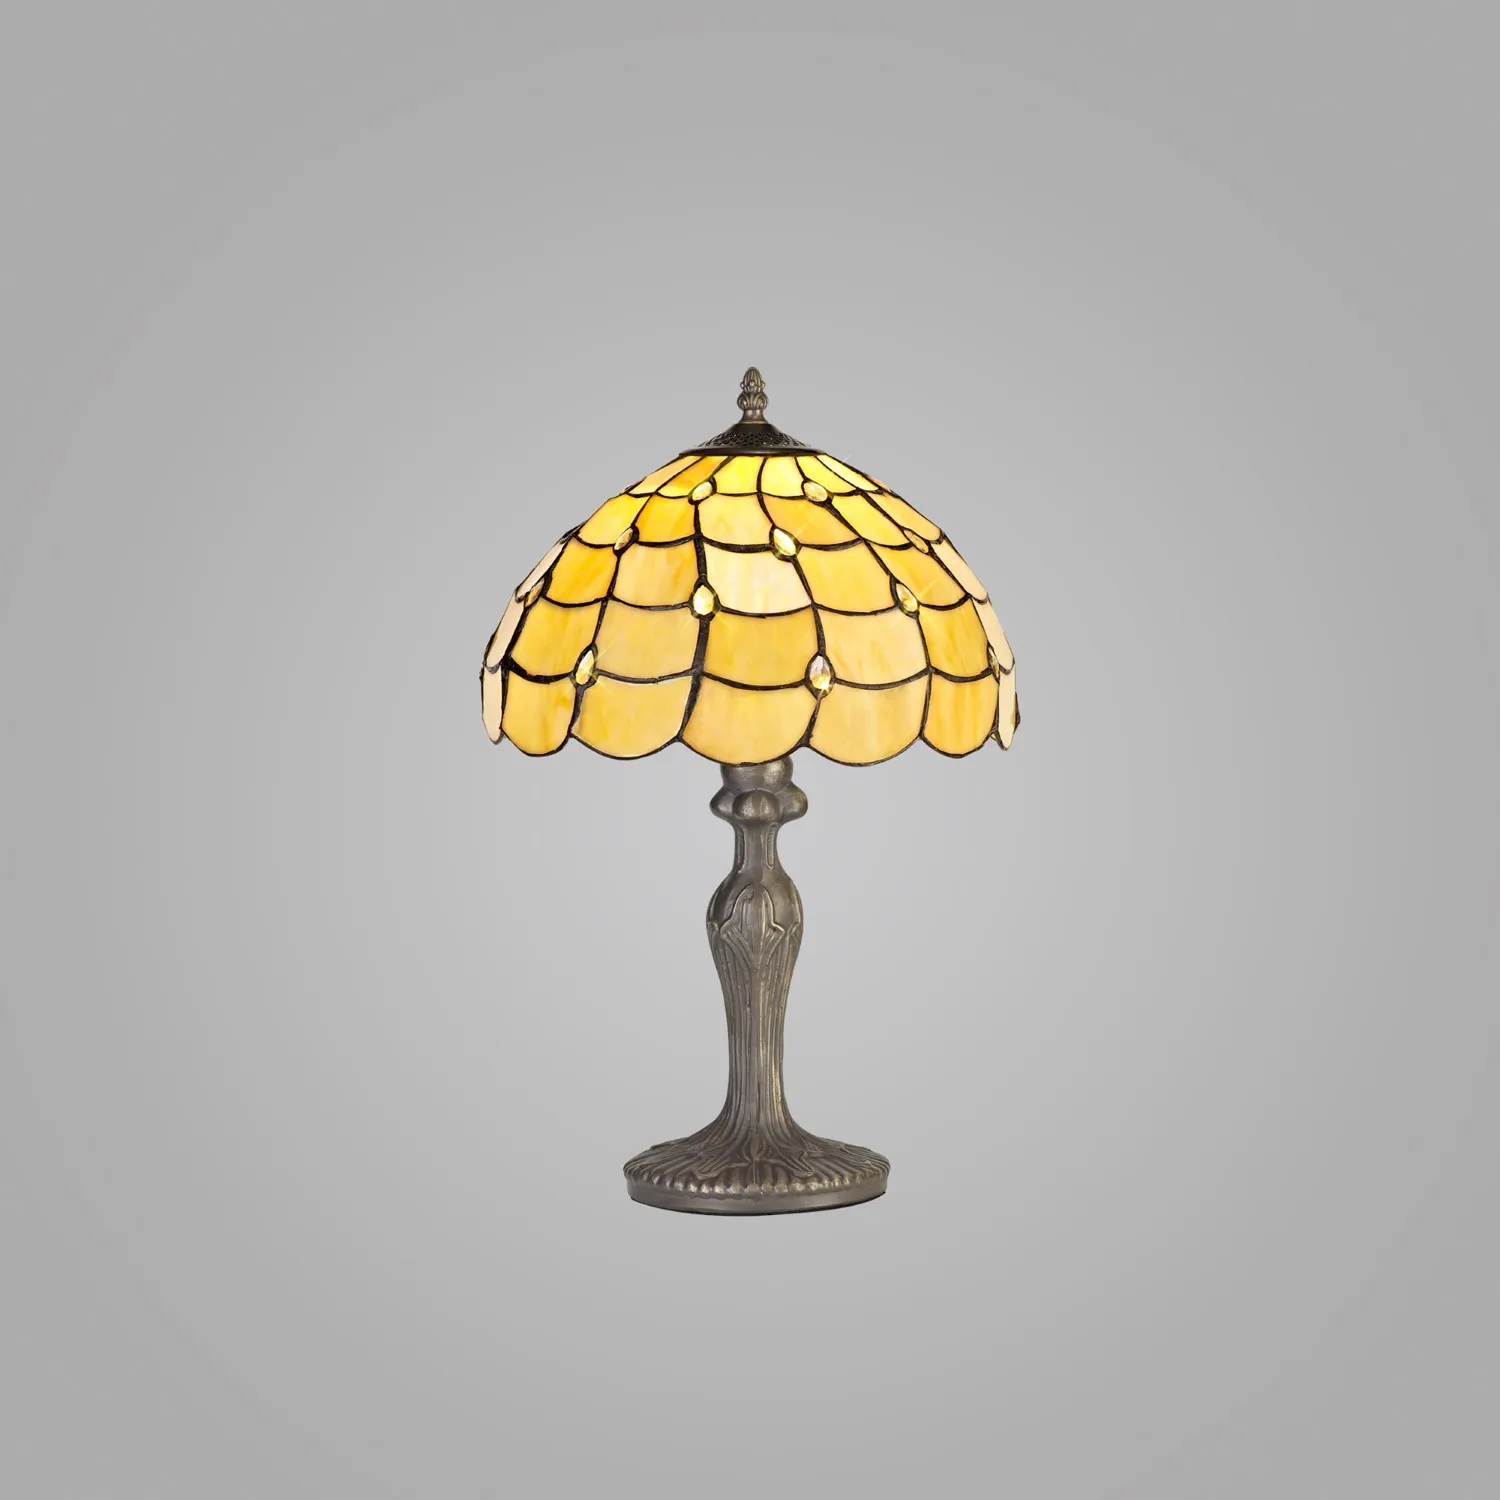 Stratford 1 Light Curved Table Lamp E27 With 30cm Tiffany Shade, Beige Clear Crystal Aged Antique Brass